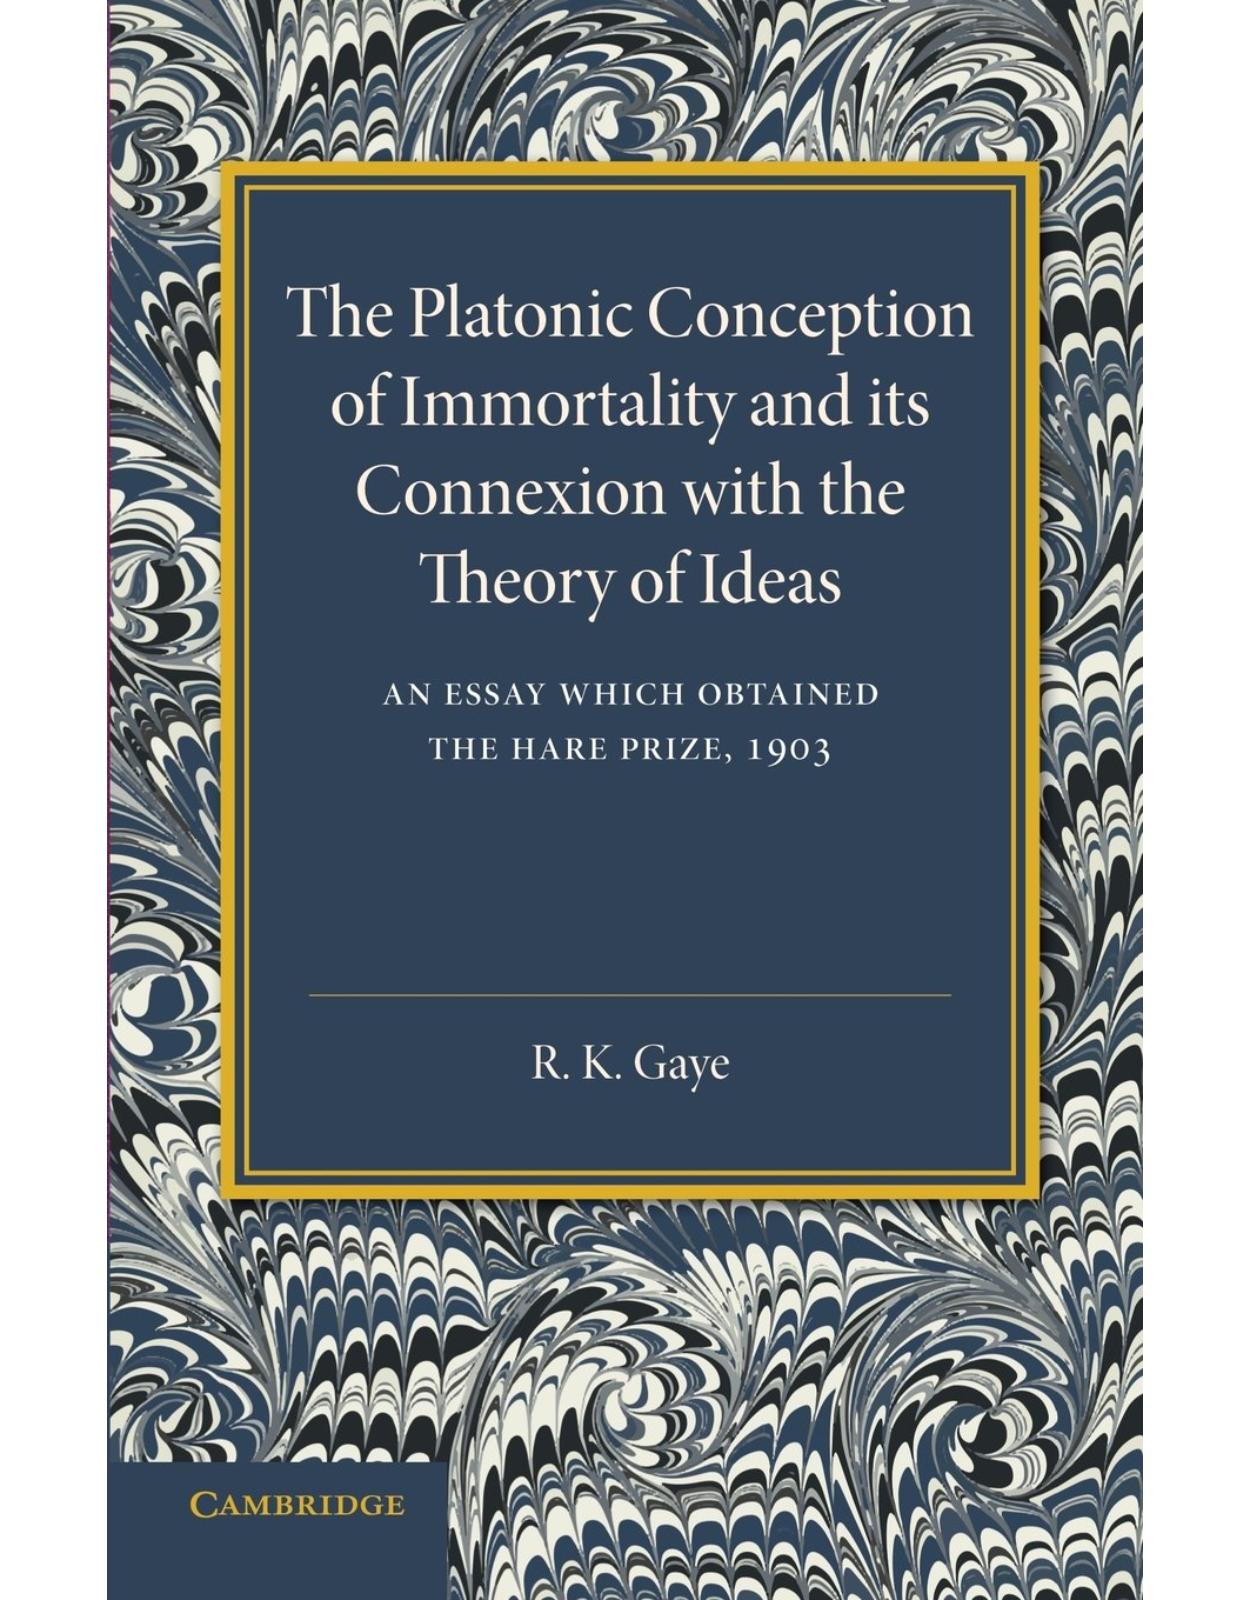 The Platonic Conception of Immortality and its Connexion with the Theory of Ideas